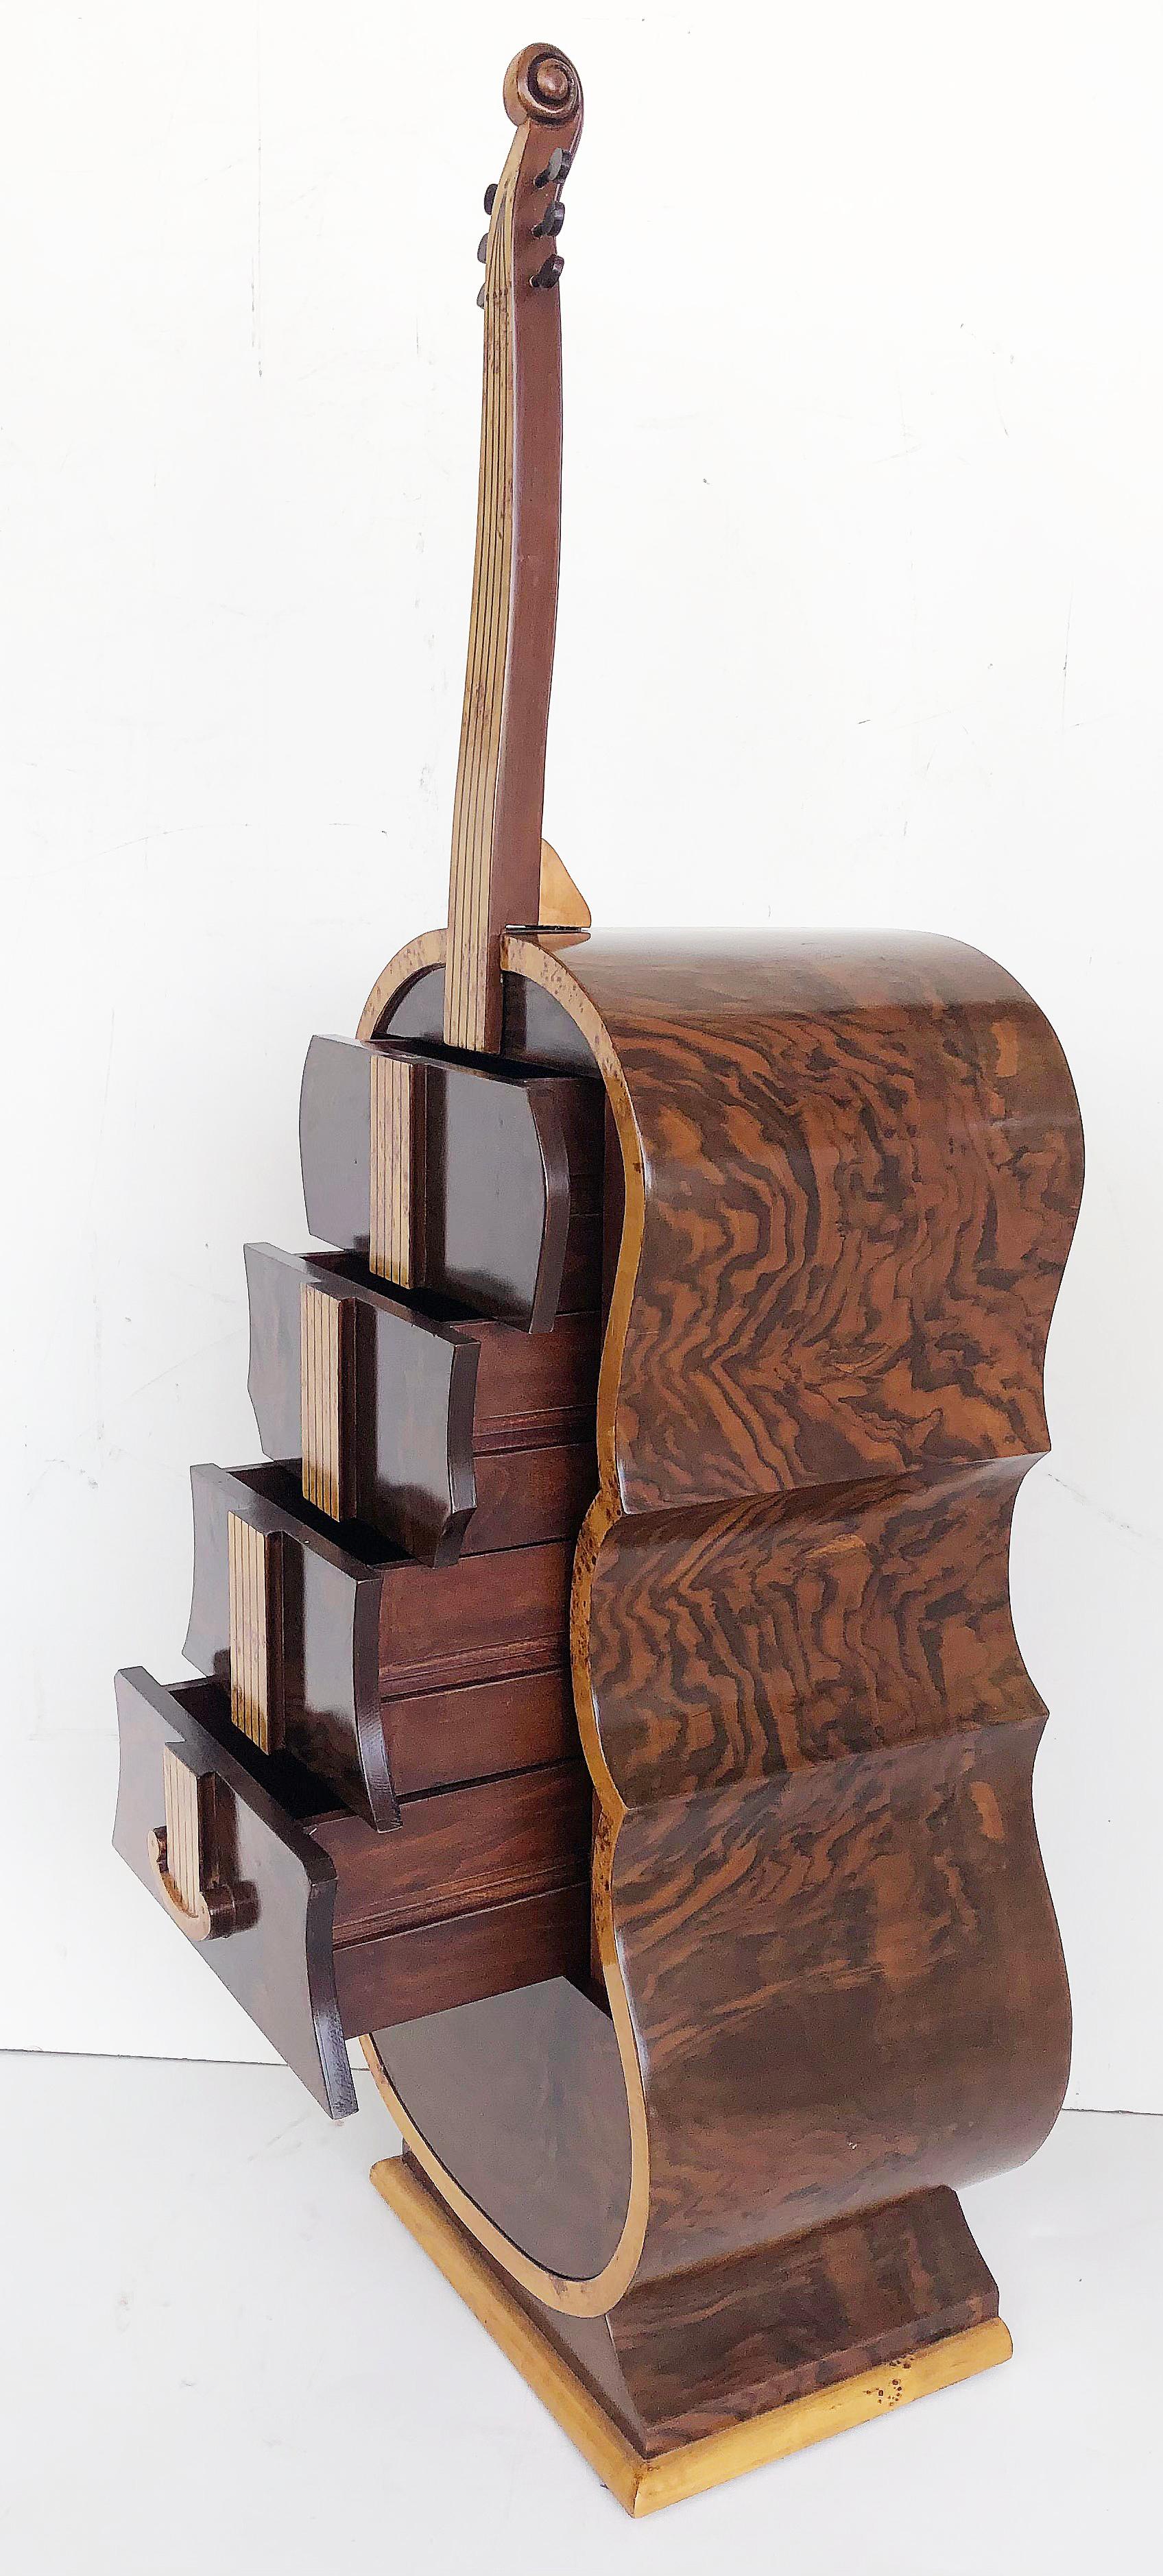 Art Deco-style whimsical burl wood cello shaped cabinet with secret compartment.

Offered for sale is an art deco-style whimsical exotic burl wood chest of drawers created in the form of a standing cello. The cabinet has matched-grain veneers,